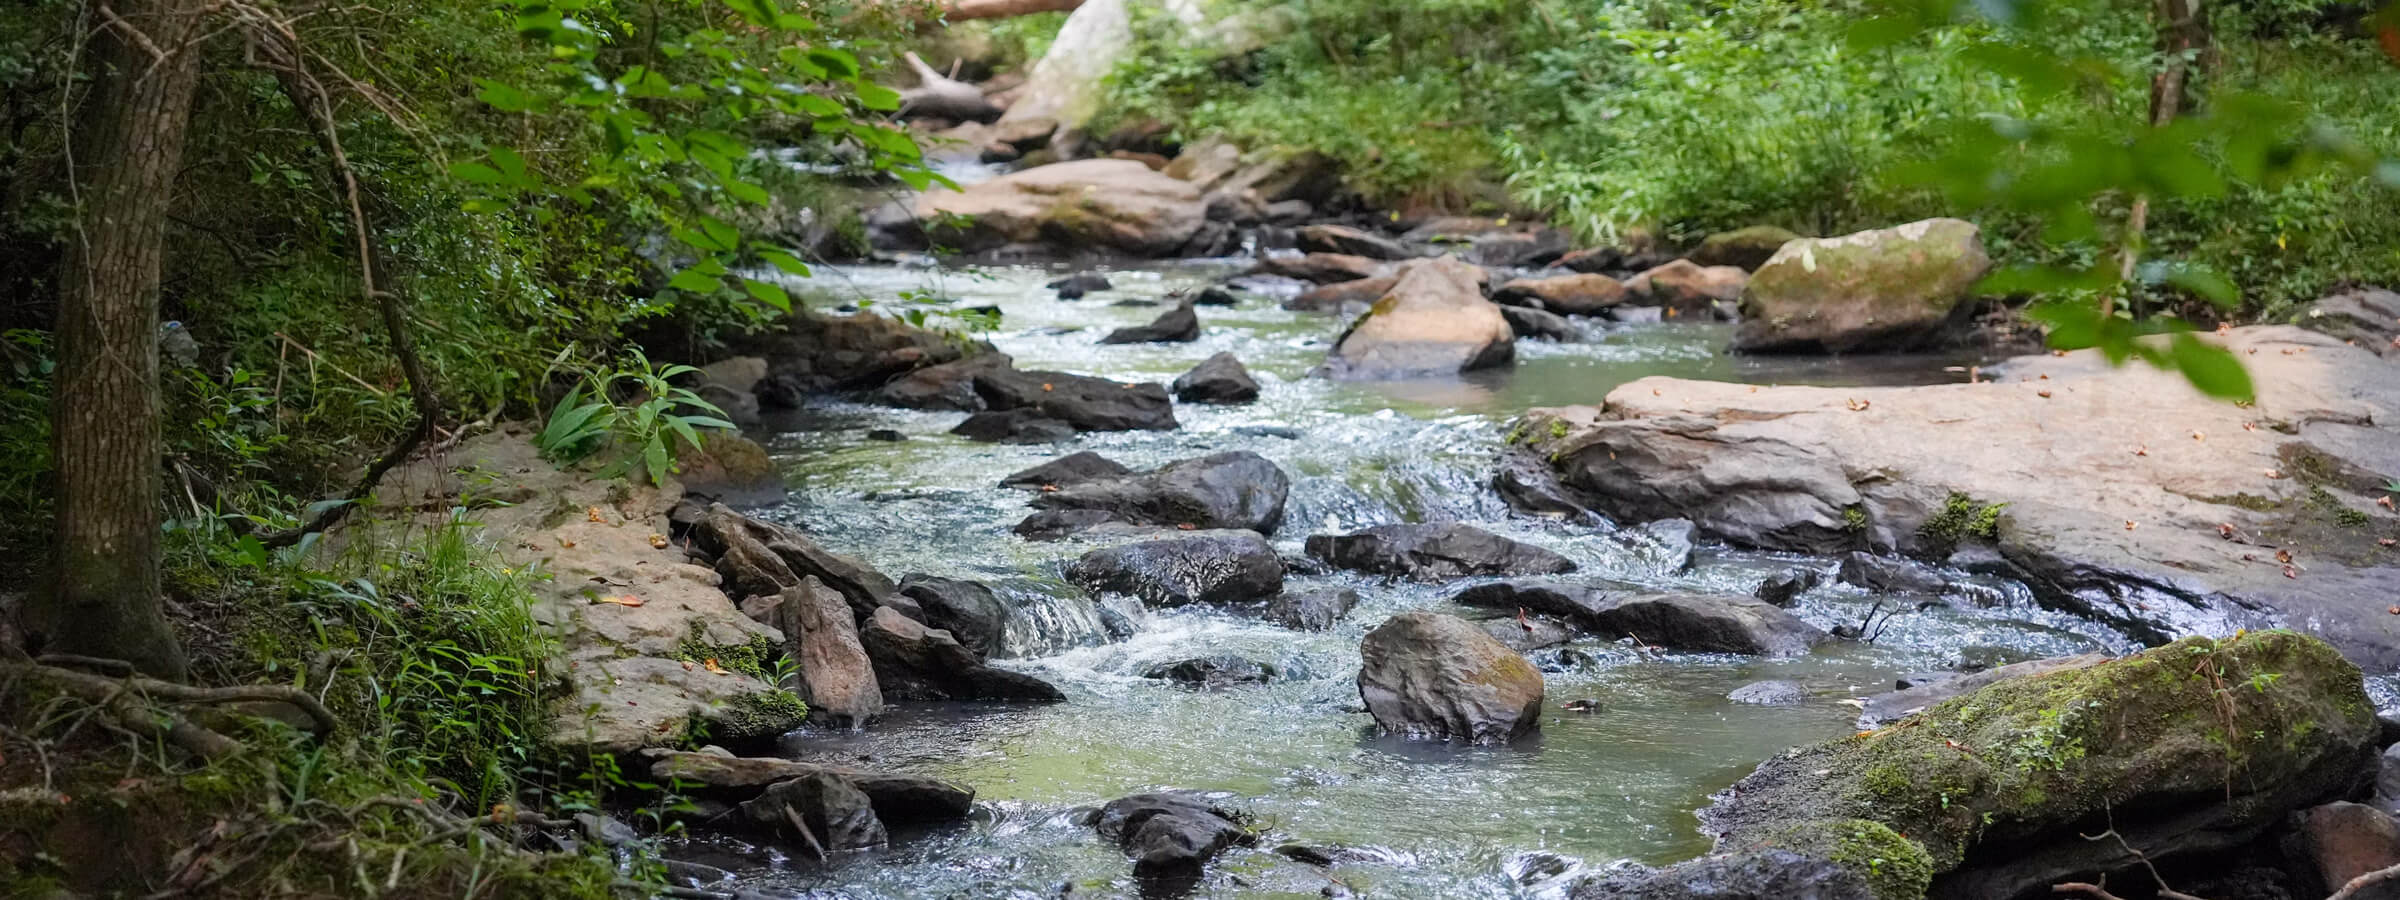 flowing stream with rocks and greenery